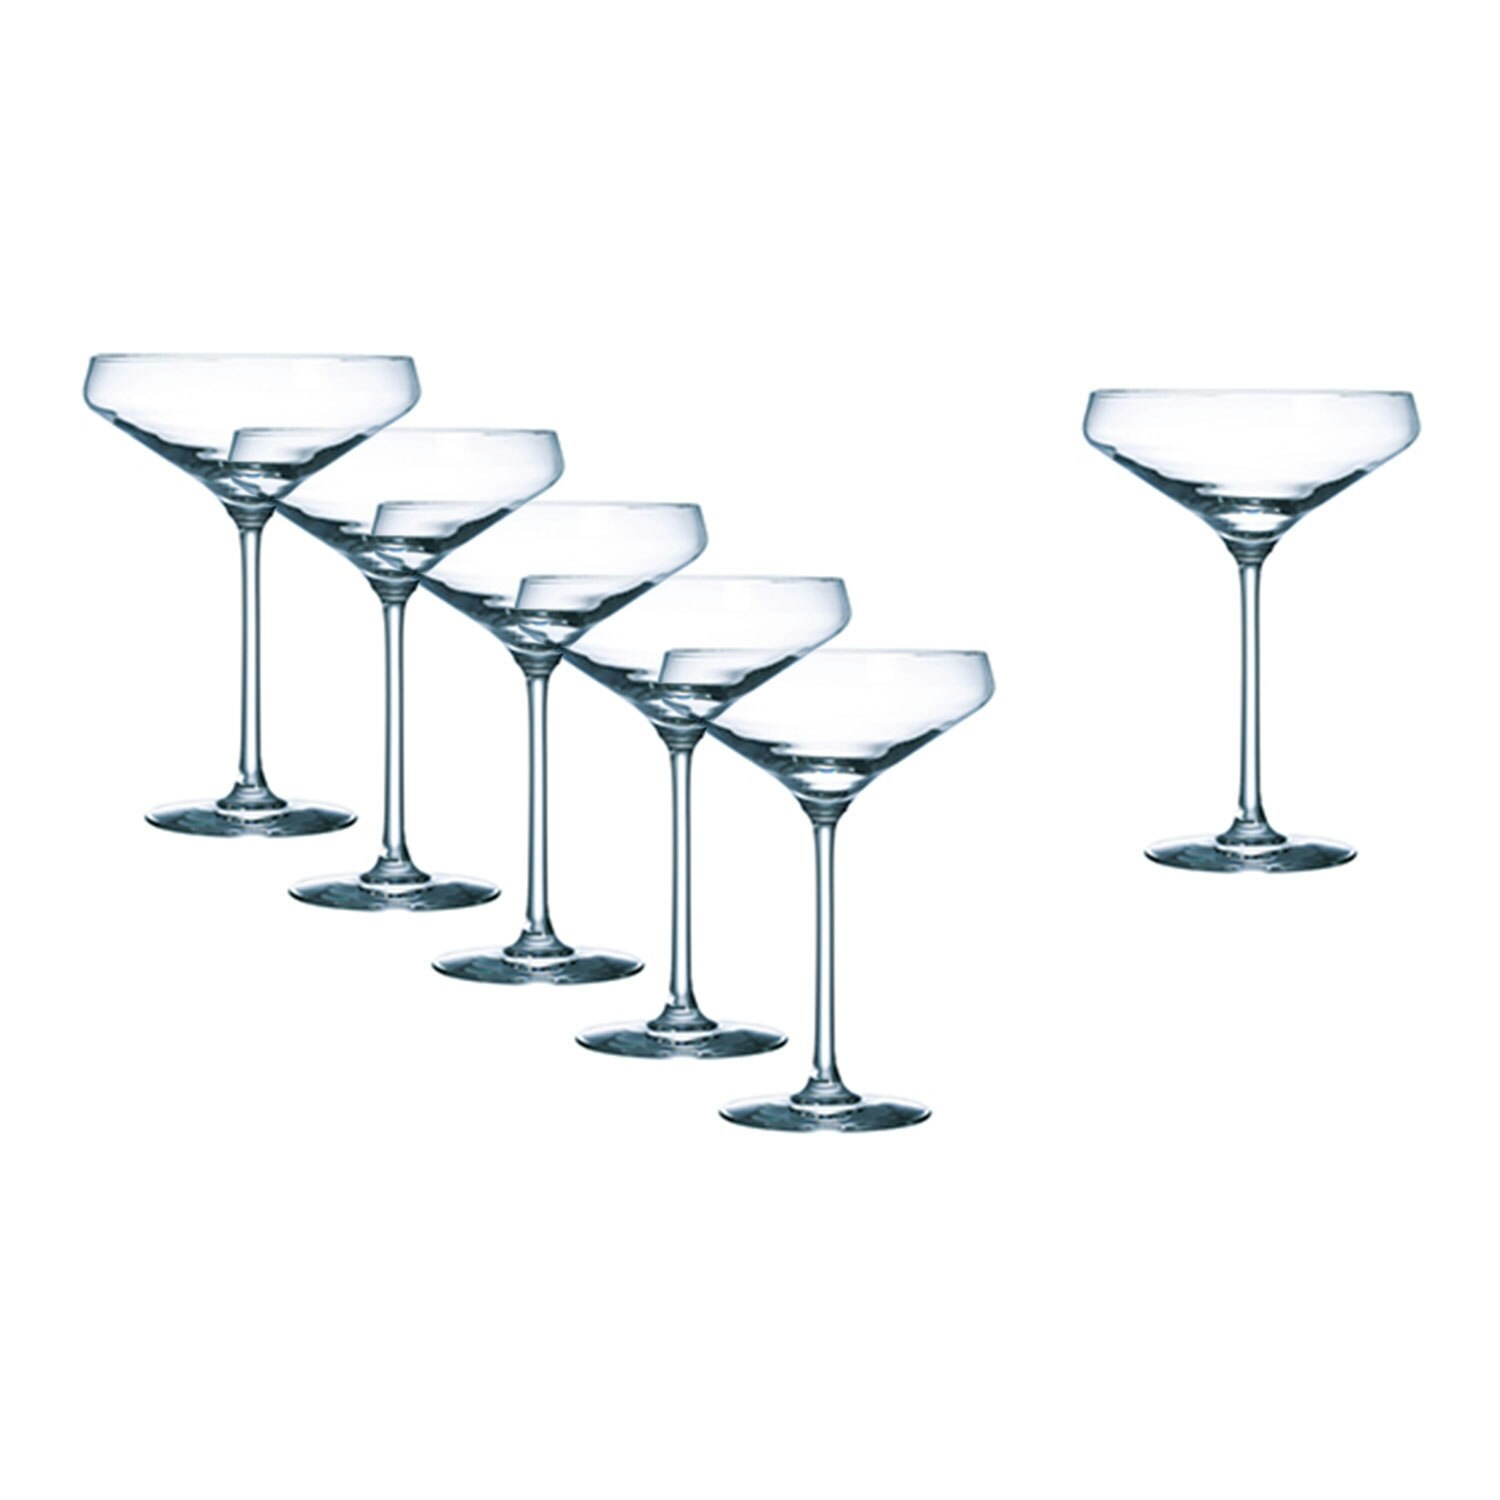 https://royaldesign.com/image/2/chefsommelier-open-up-champagne-coupe-30-cl-6-pack-0